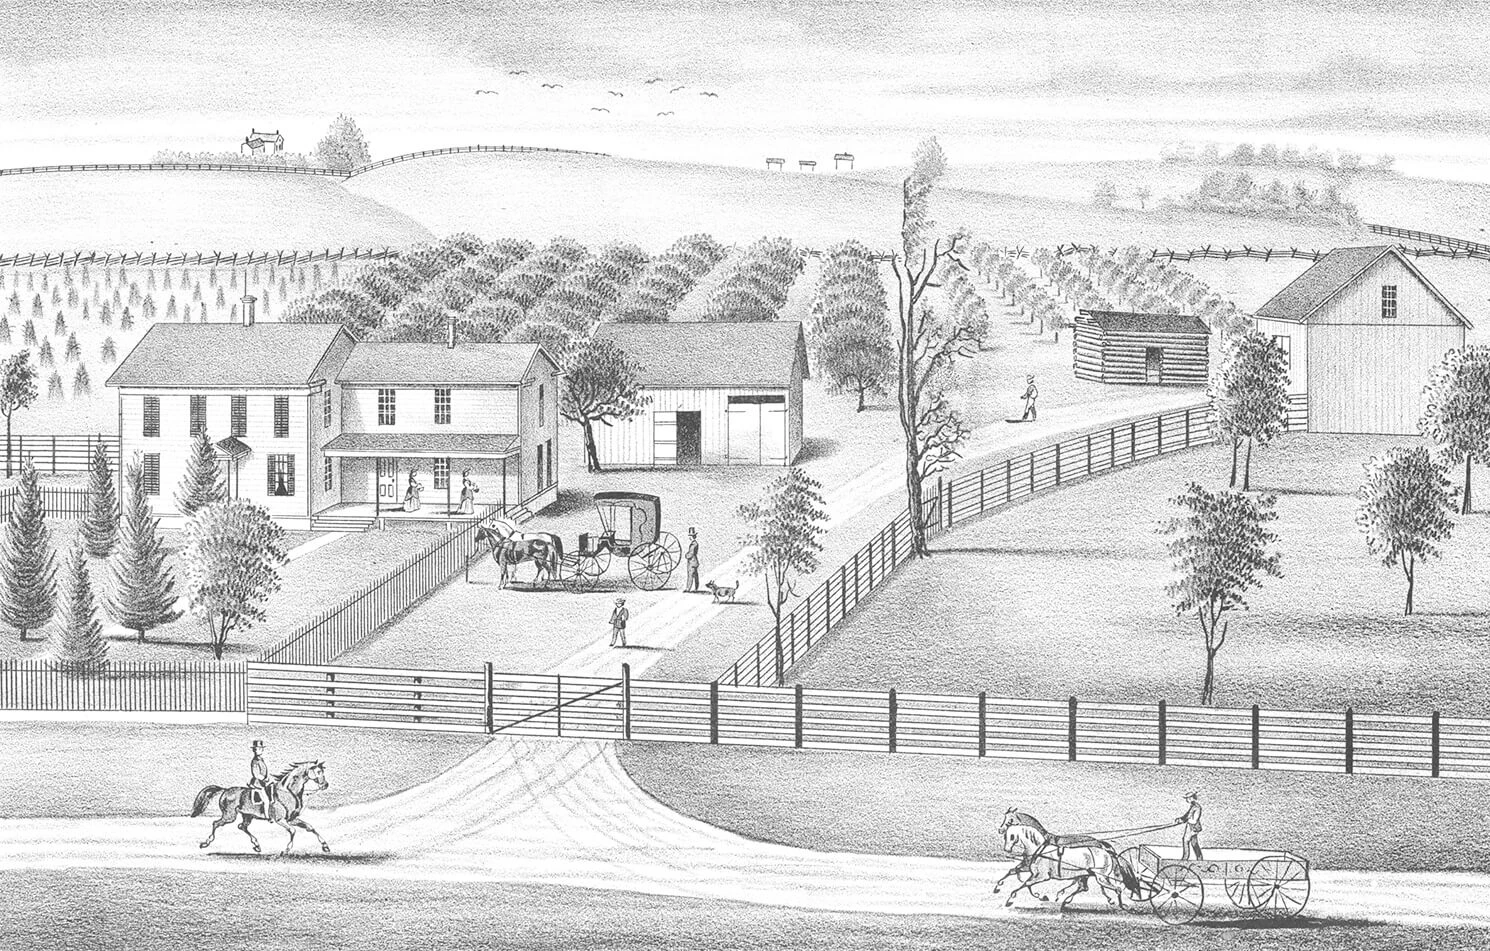 Black and white illustration of a farmhouse, two barns, and a cabin, surrounded by trees and fencing. There is a horse and carriage at the center. In the background are neat rows of trees.